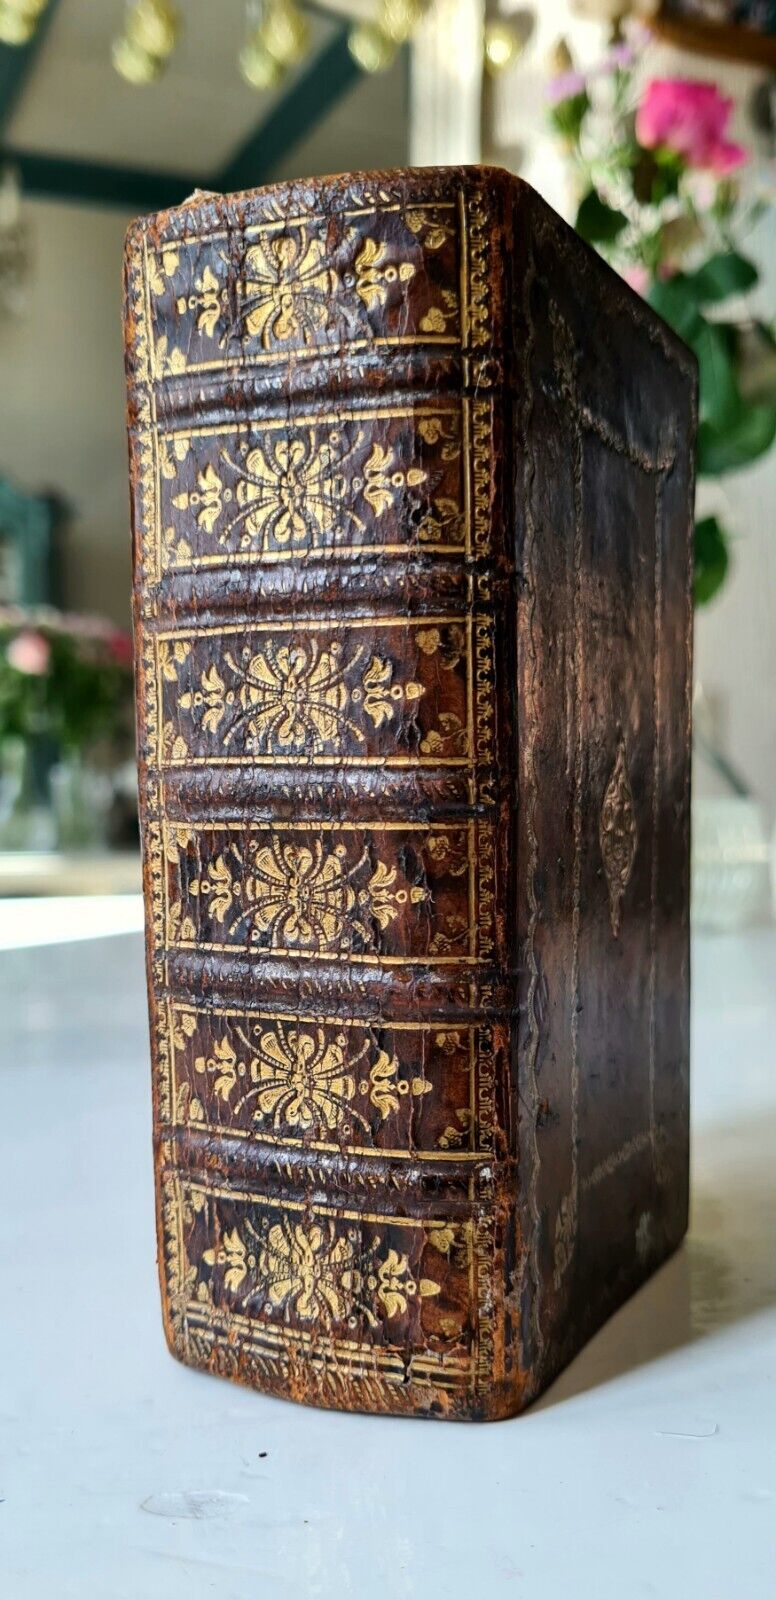 Old & rare French Bible, 18th century in beautiful gold-stamped binding